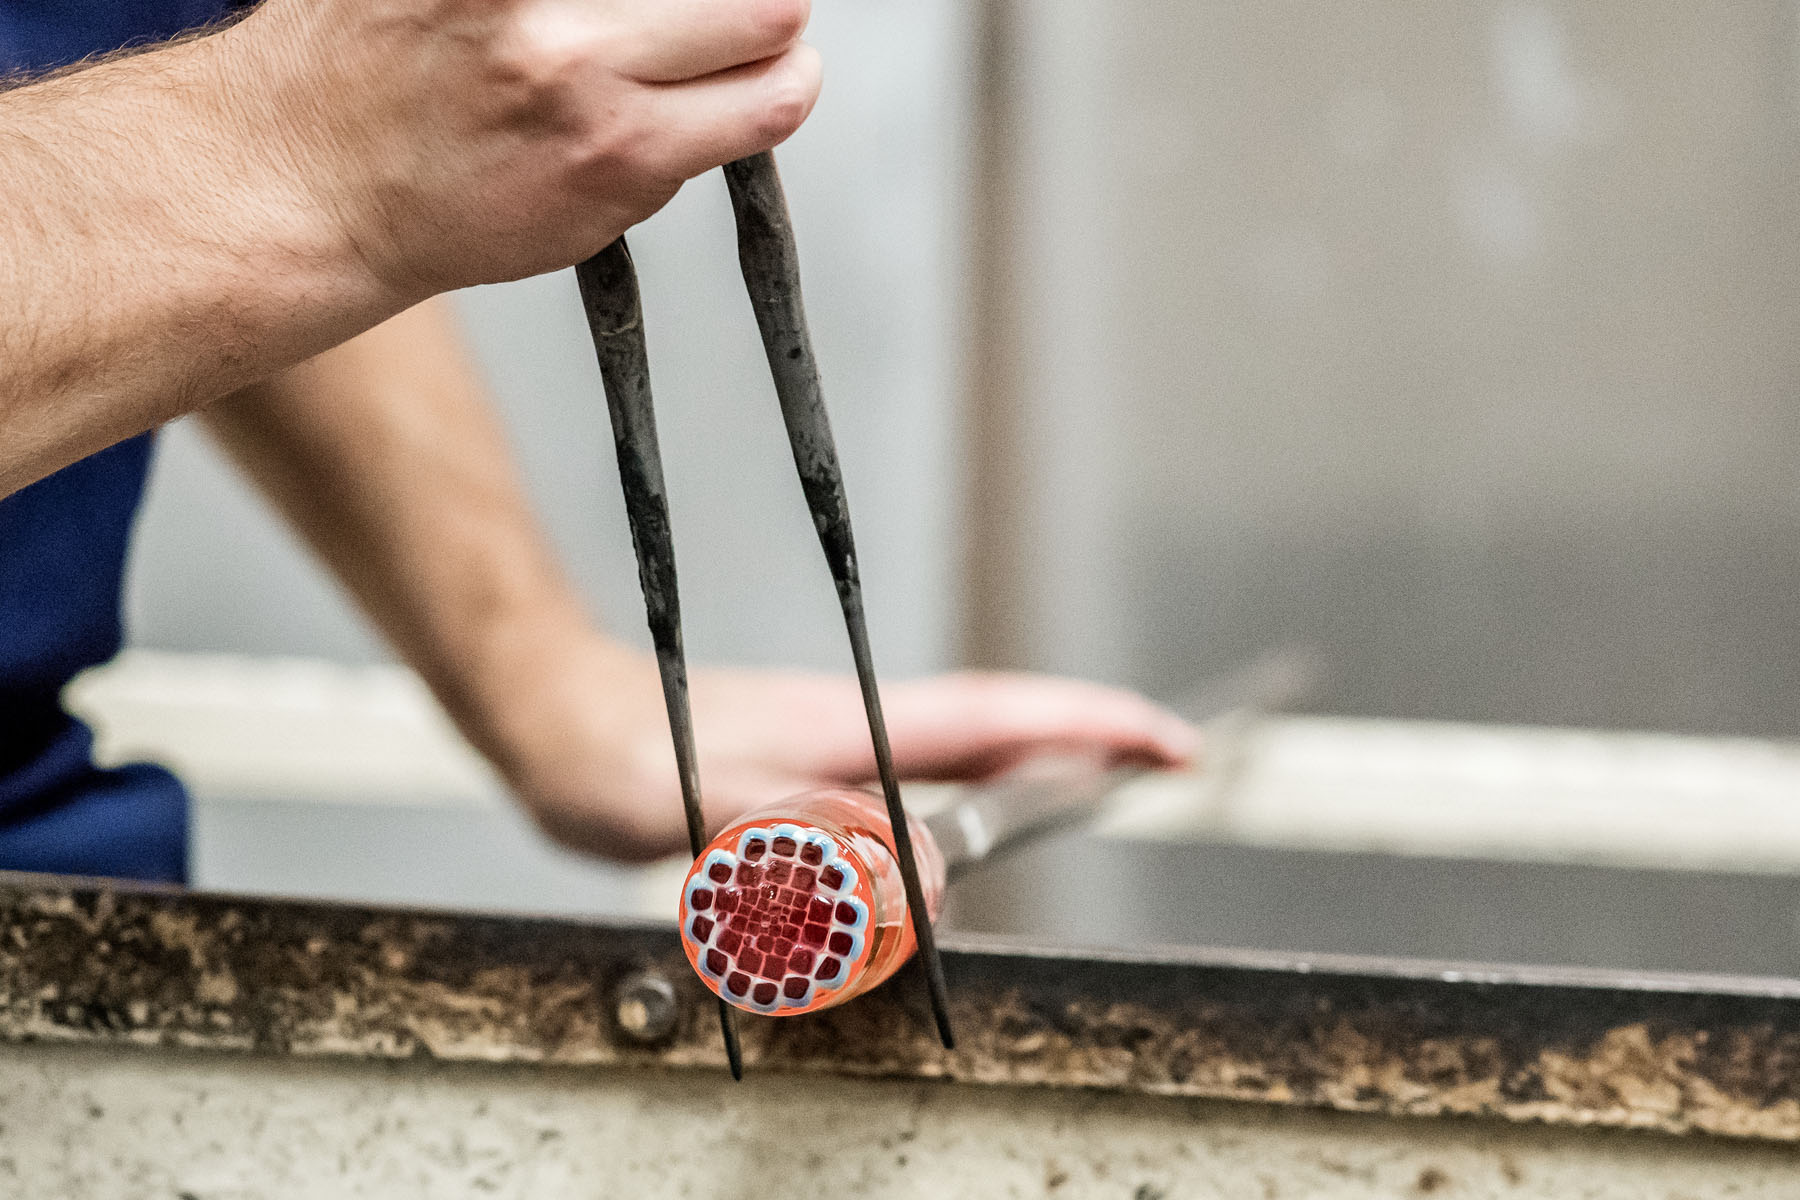 Making the Millefiori using patterns assembled from hot threads pulled from the molten material drawn from the mouth of the pots in the furnace. 